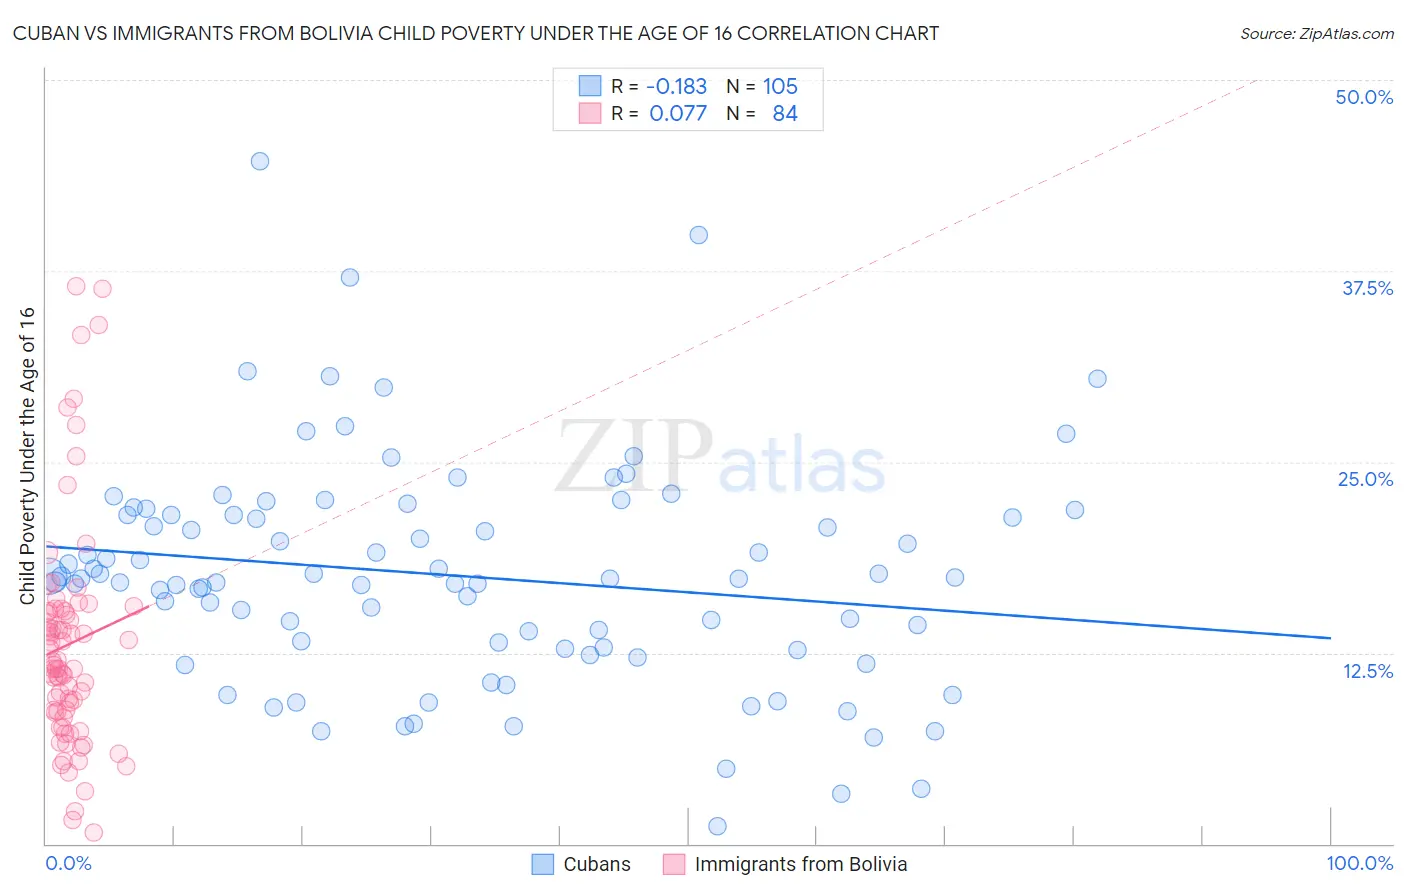 Cuban vs Immigrants from Bolivia Child Poverty Under the Age of 16